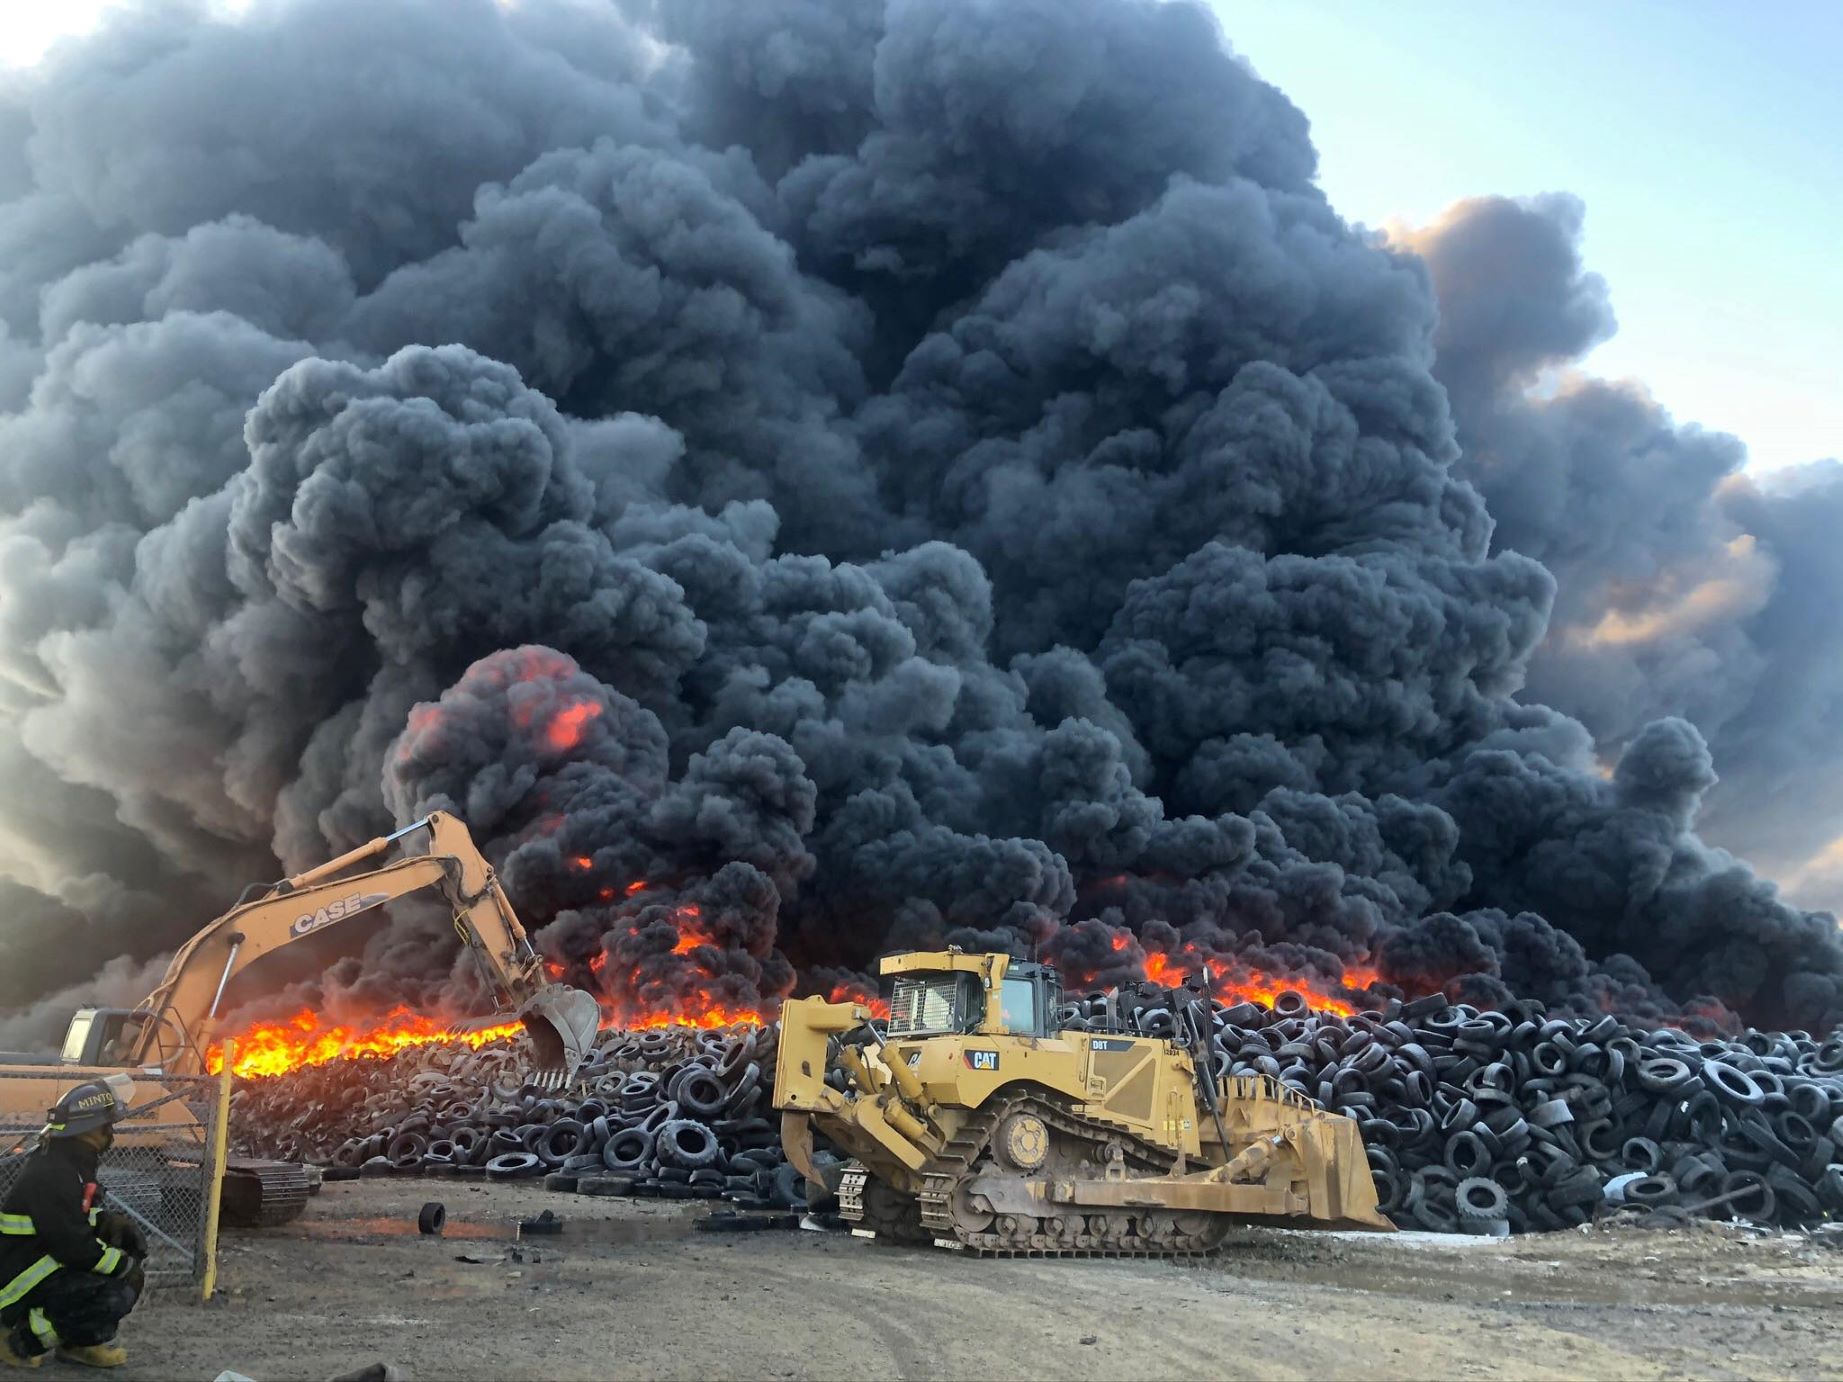 Burning tires for fuel behind Maine's increase in toxic chemicals